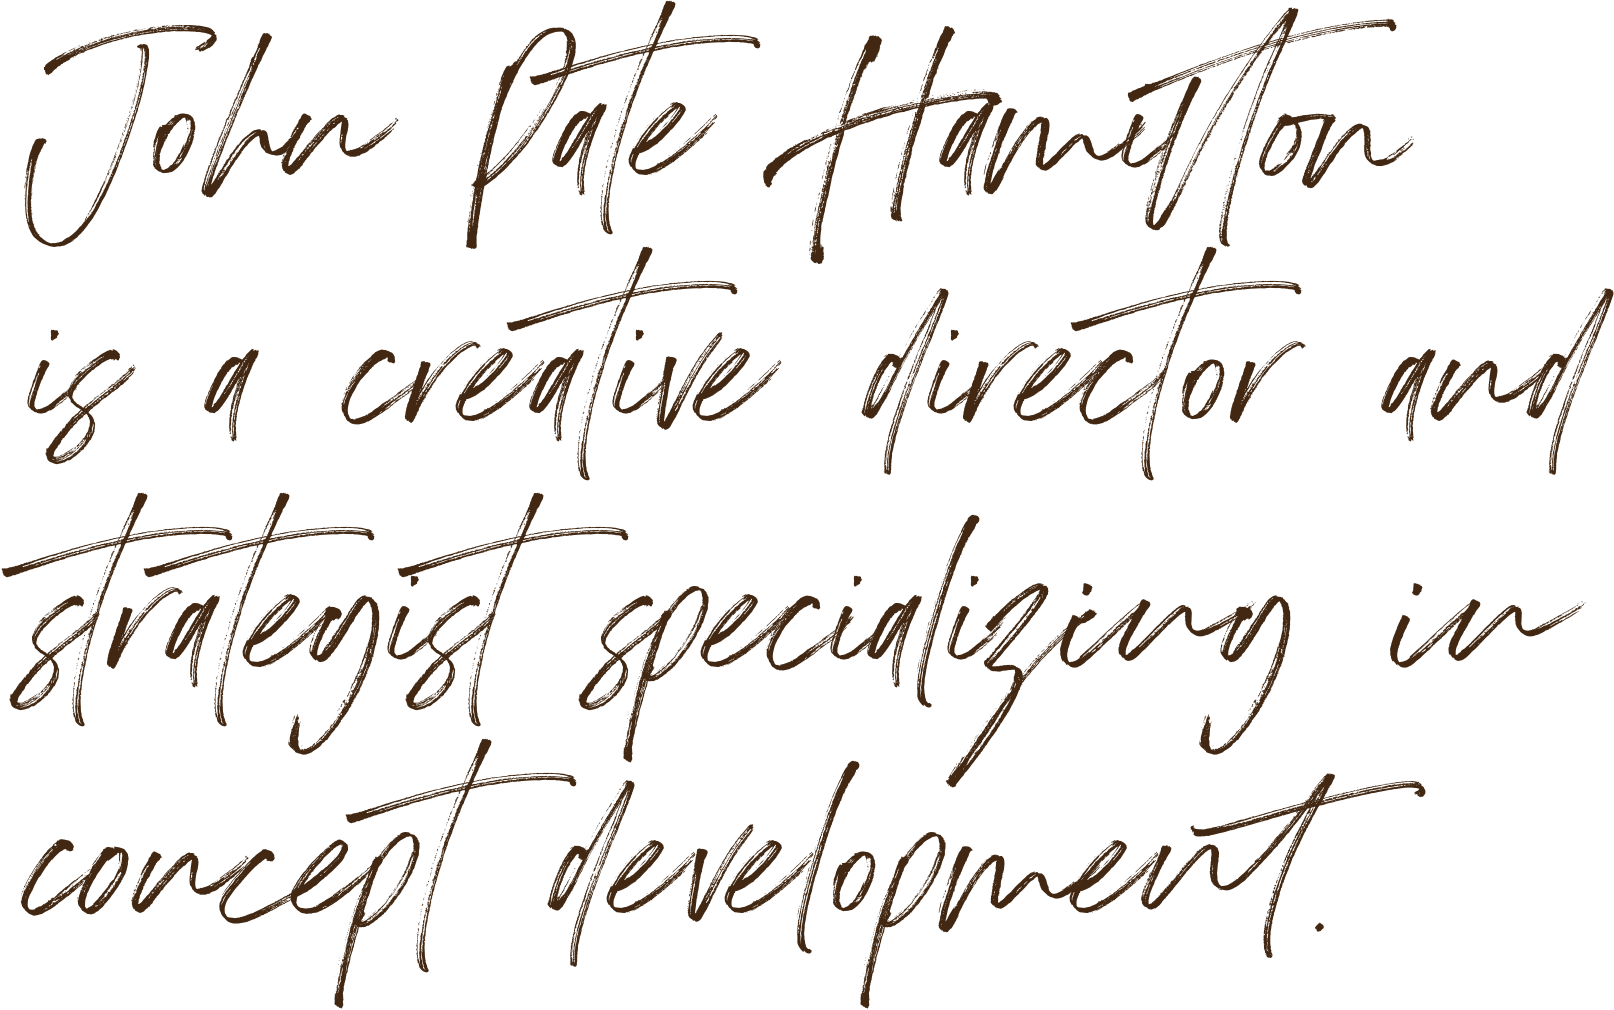 John Pate Hamilton is a creative director and strategist specializing in concept development.